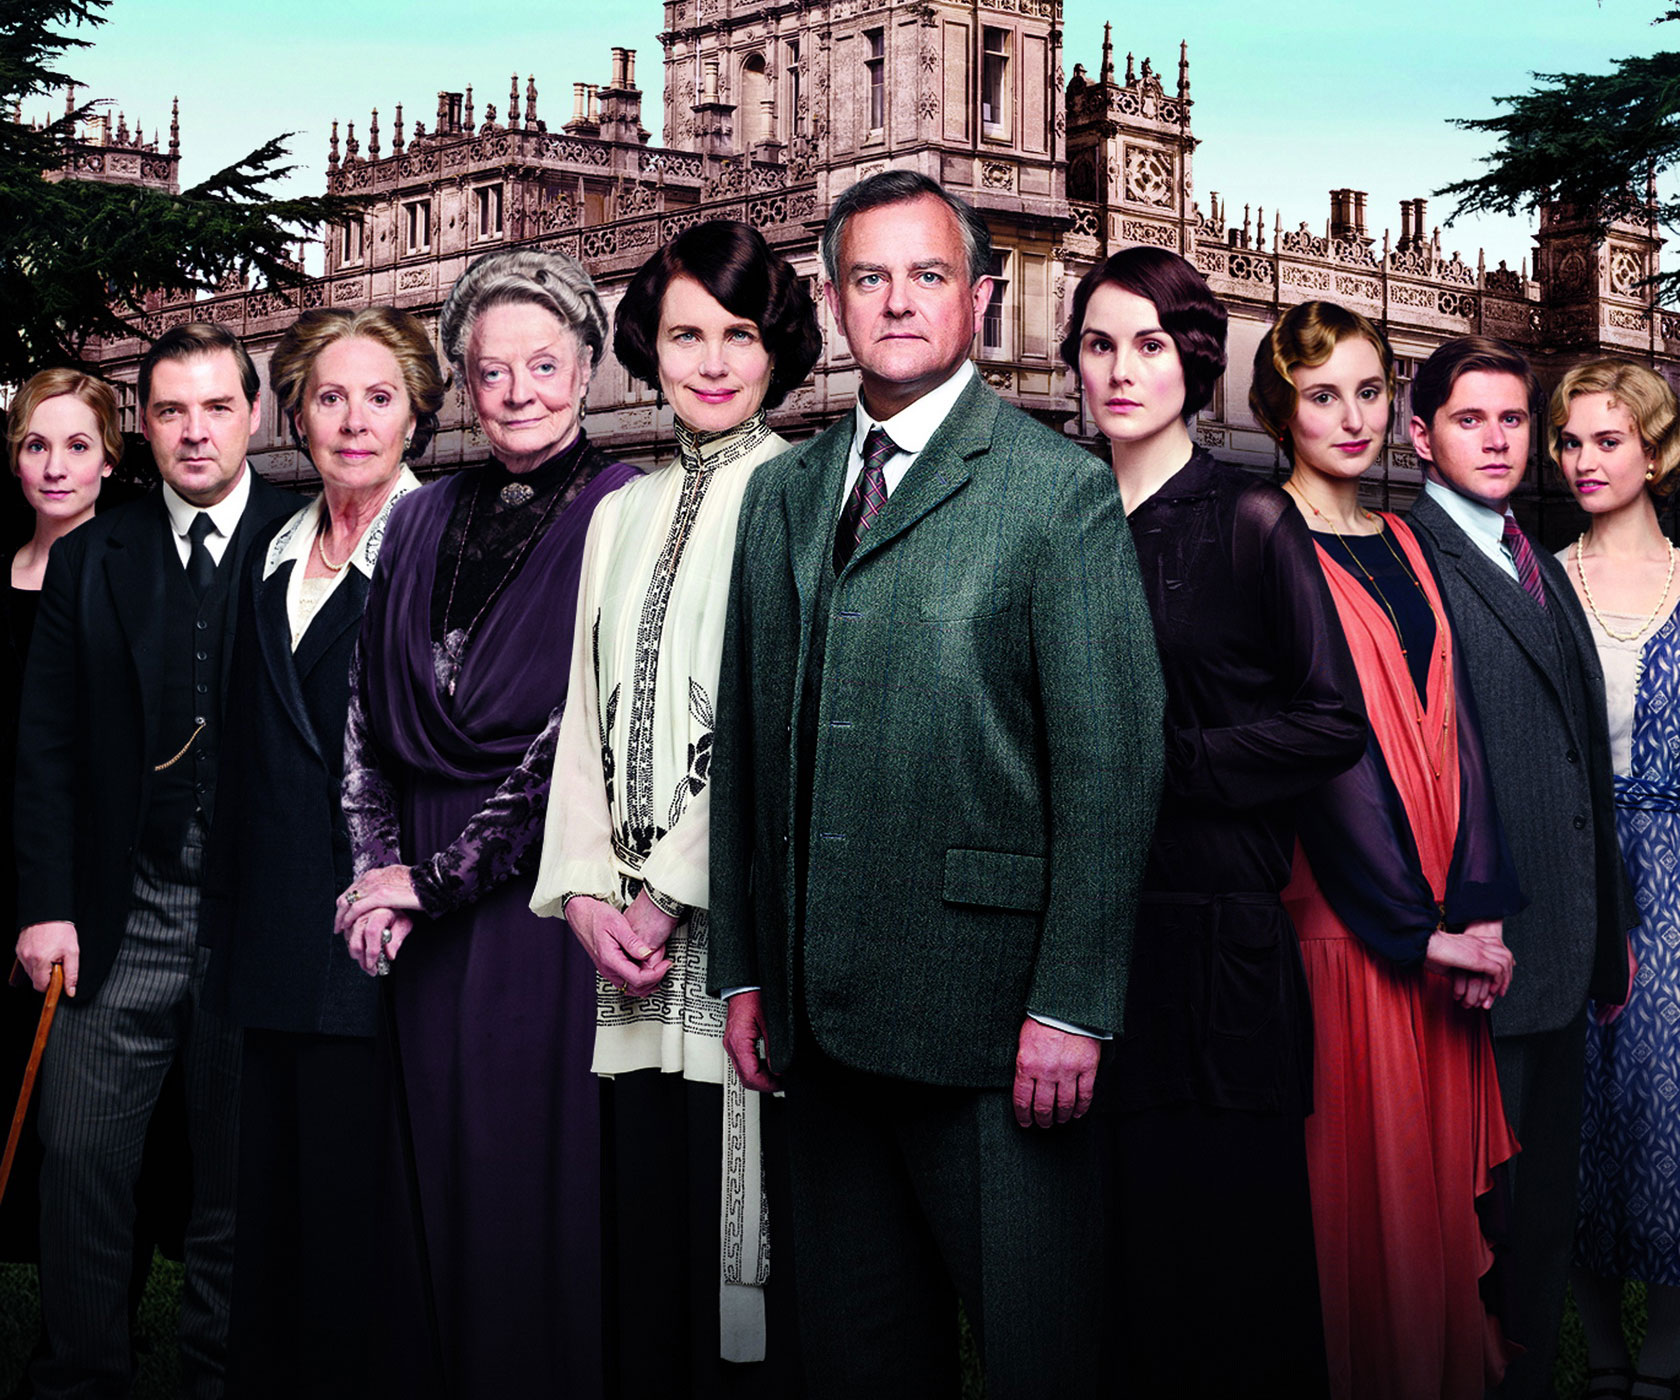 The cast of Downton Abbey just reunited and the photos will make your day